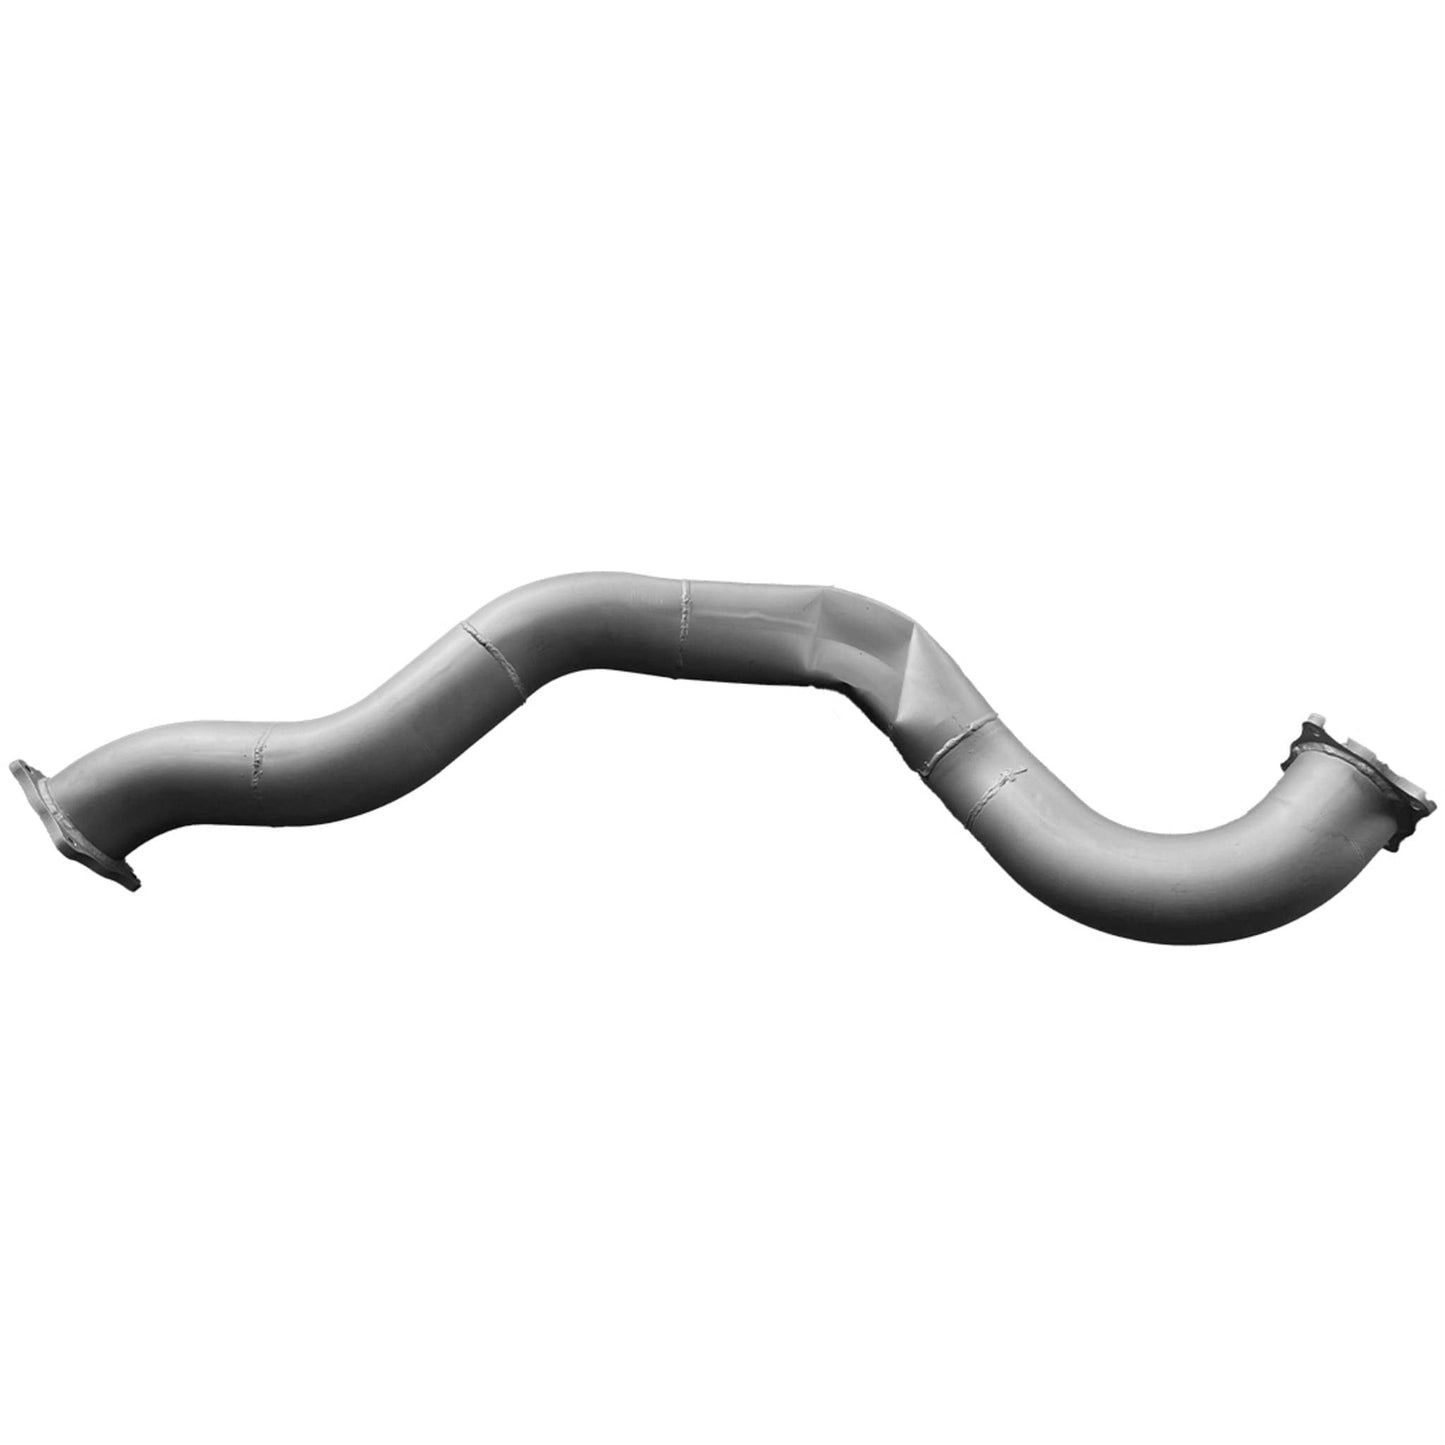 Redback Extreme Duty Twin 4" Exhaust for Toyota Landcruiser 79 Series Dual Cab